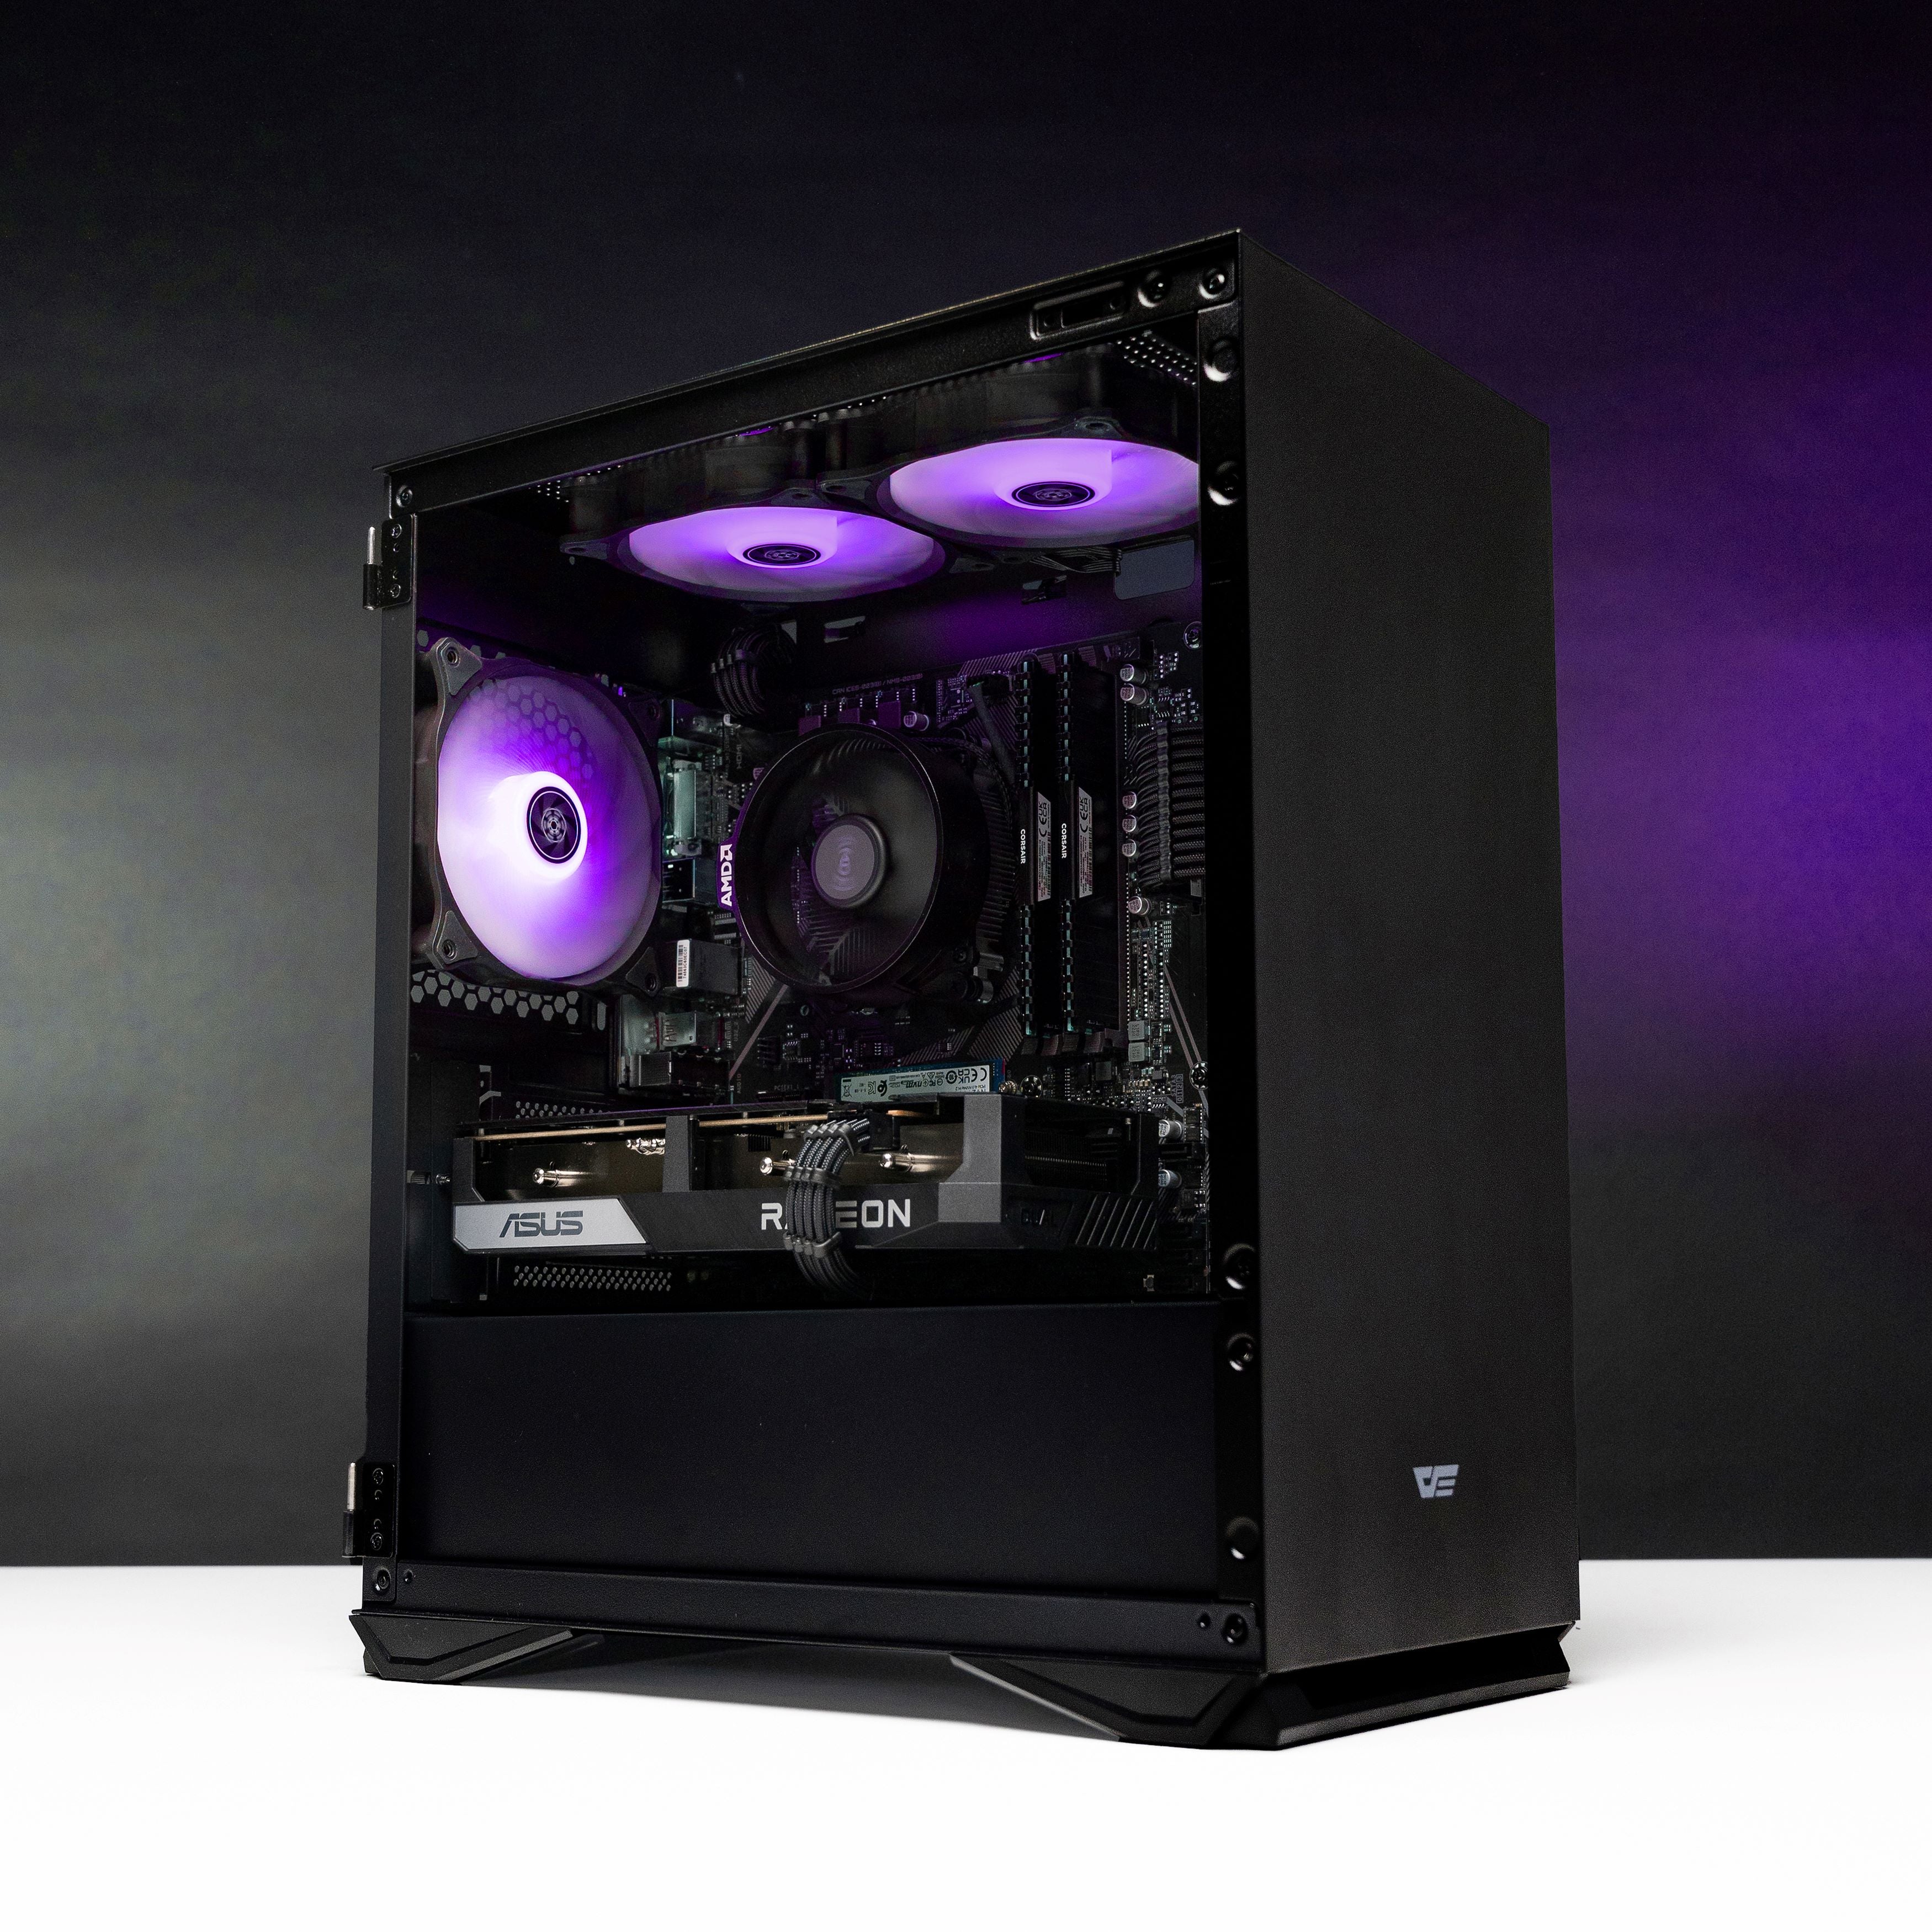 Building A Beautiful Be quiet! Gaming PC 